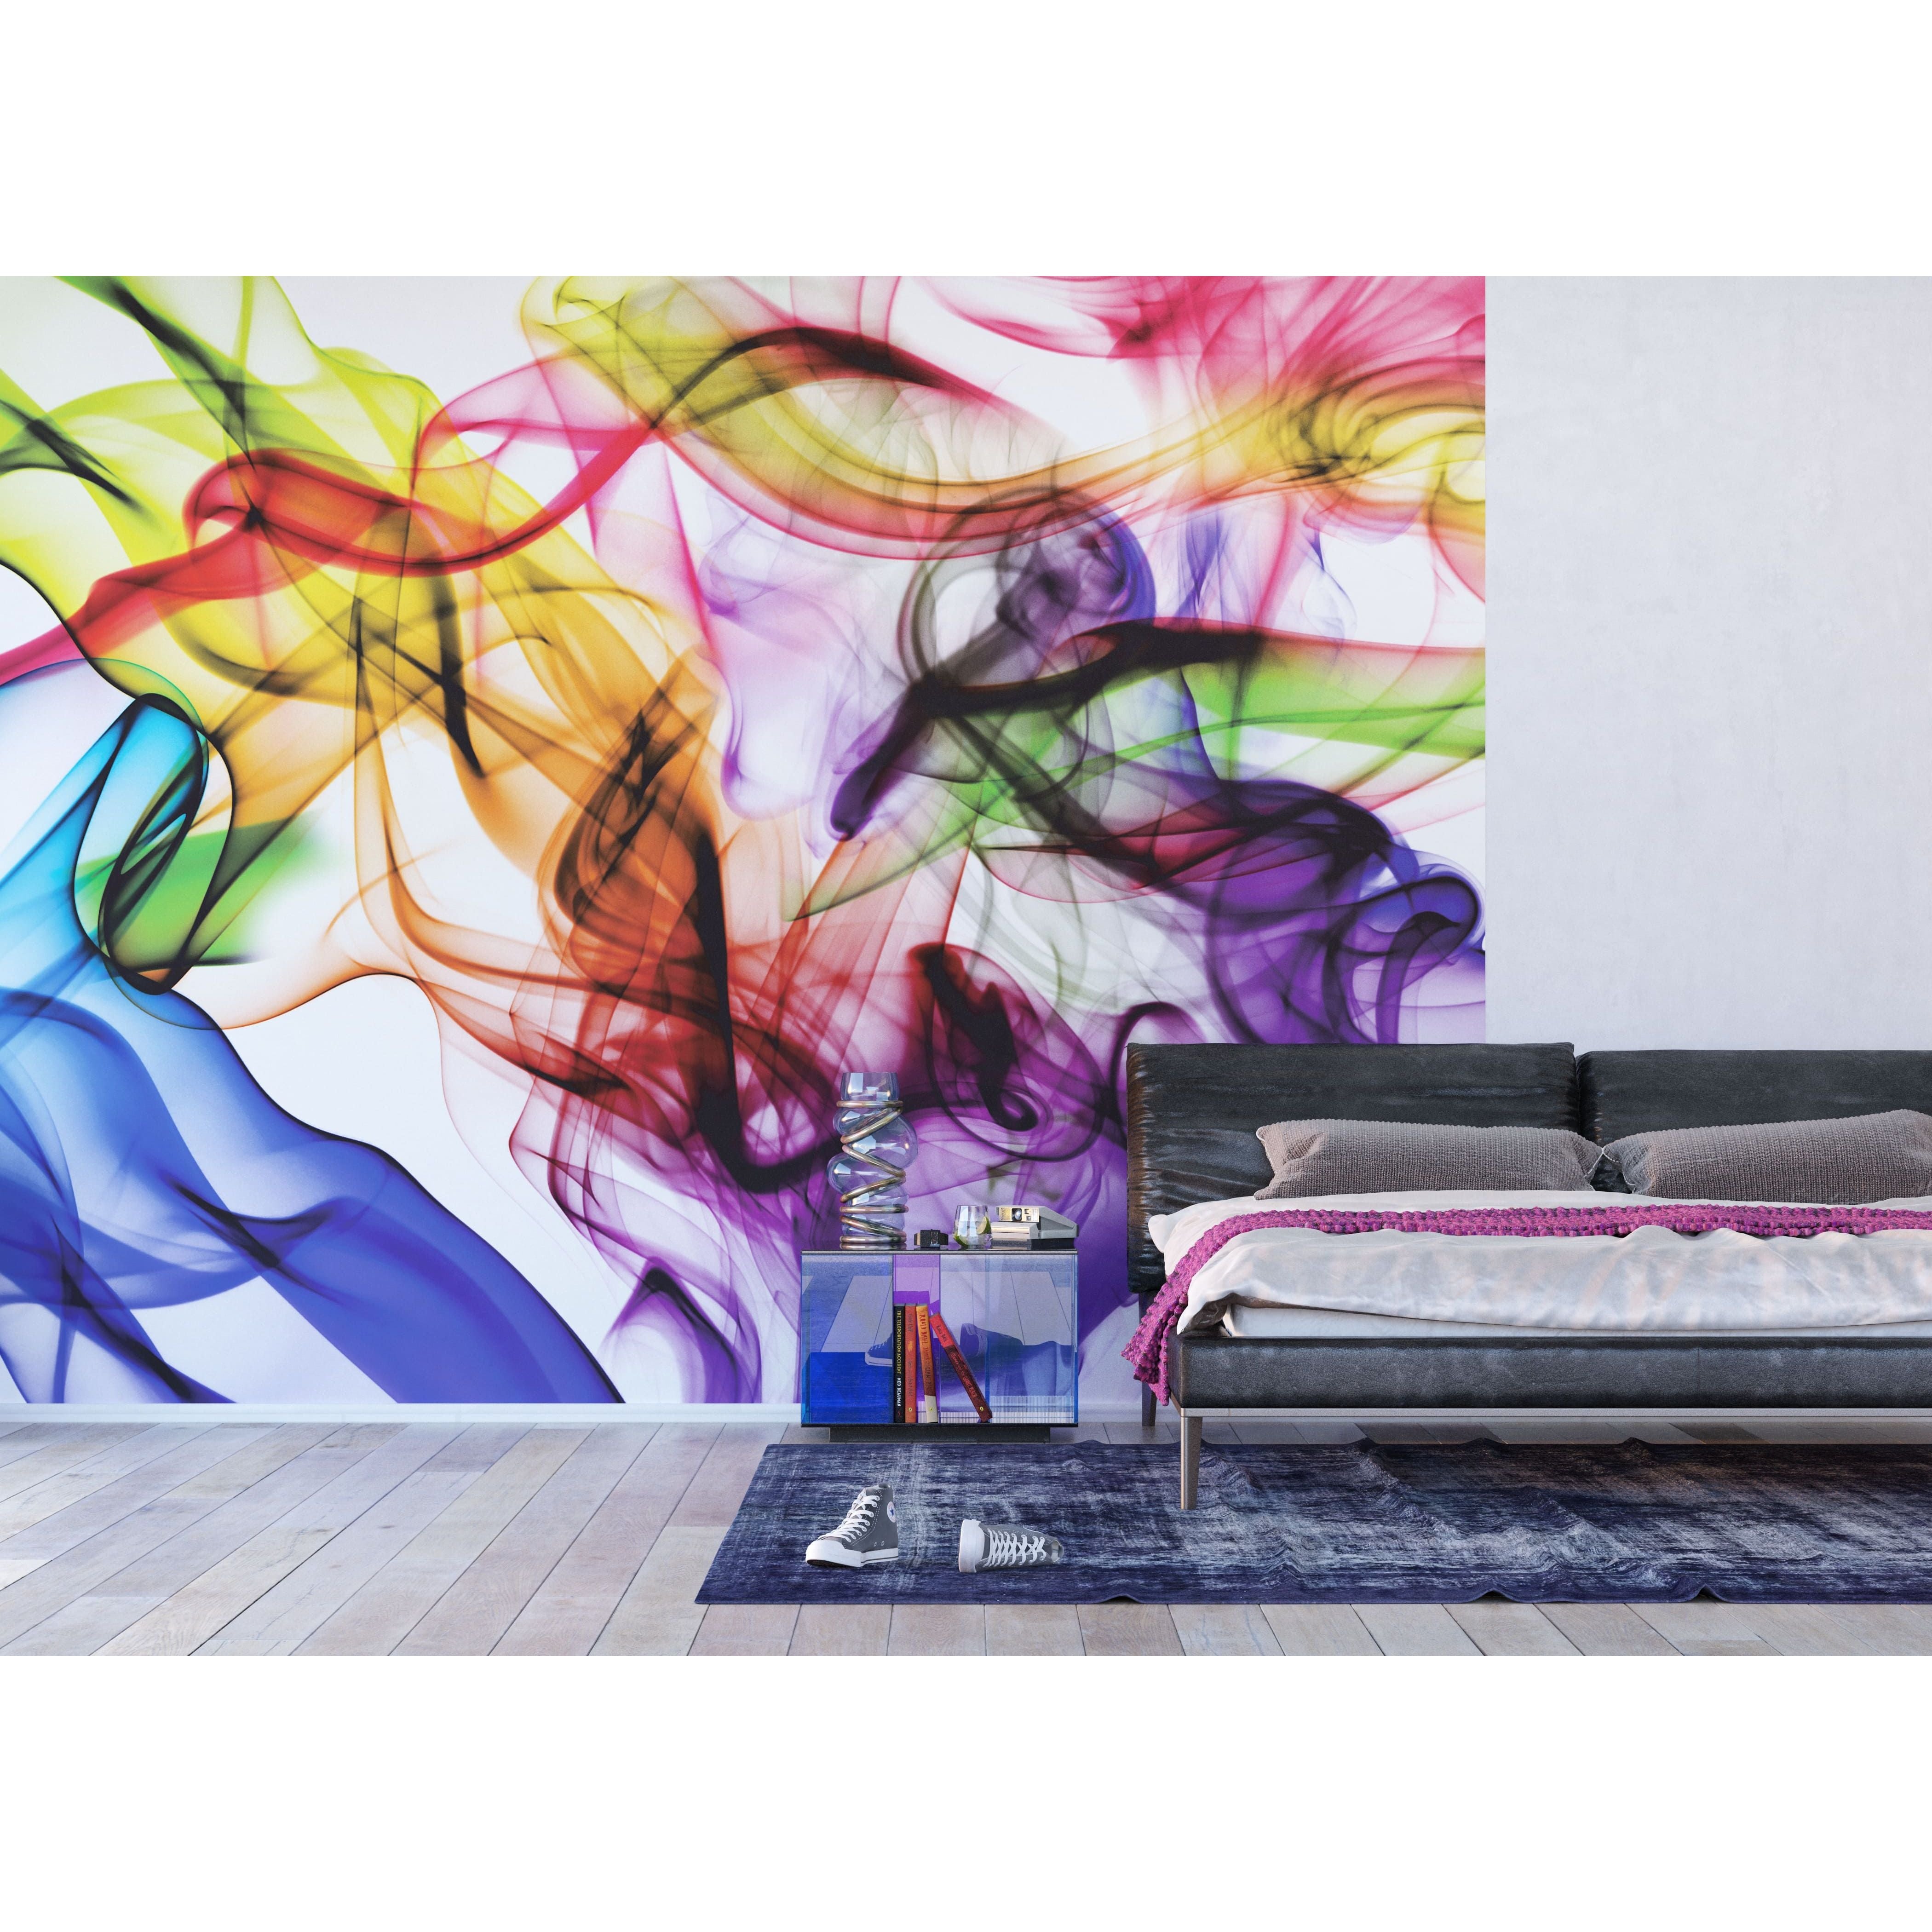 Dance of Colors Wall Mural: Ignite Your Space with Vibrant Abstraction